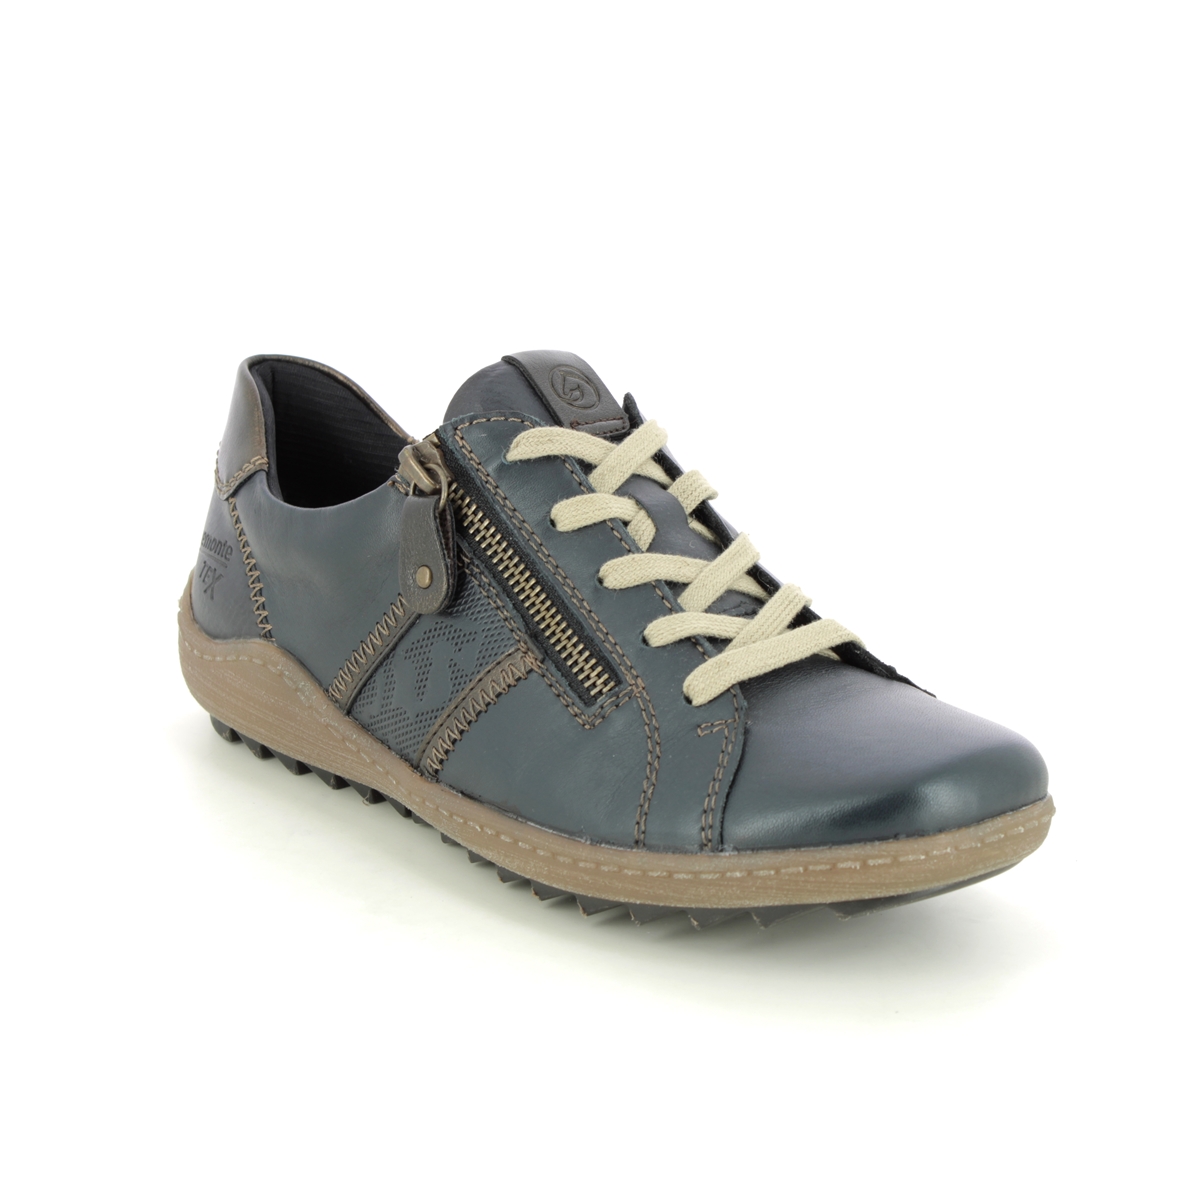 Remonte Zigspo Tex 15 Navy Leather Womens Lacing Shoes R1426-15 In Size 37 In Plain Navy Leather